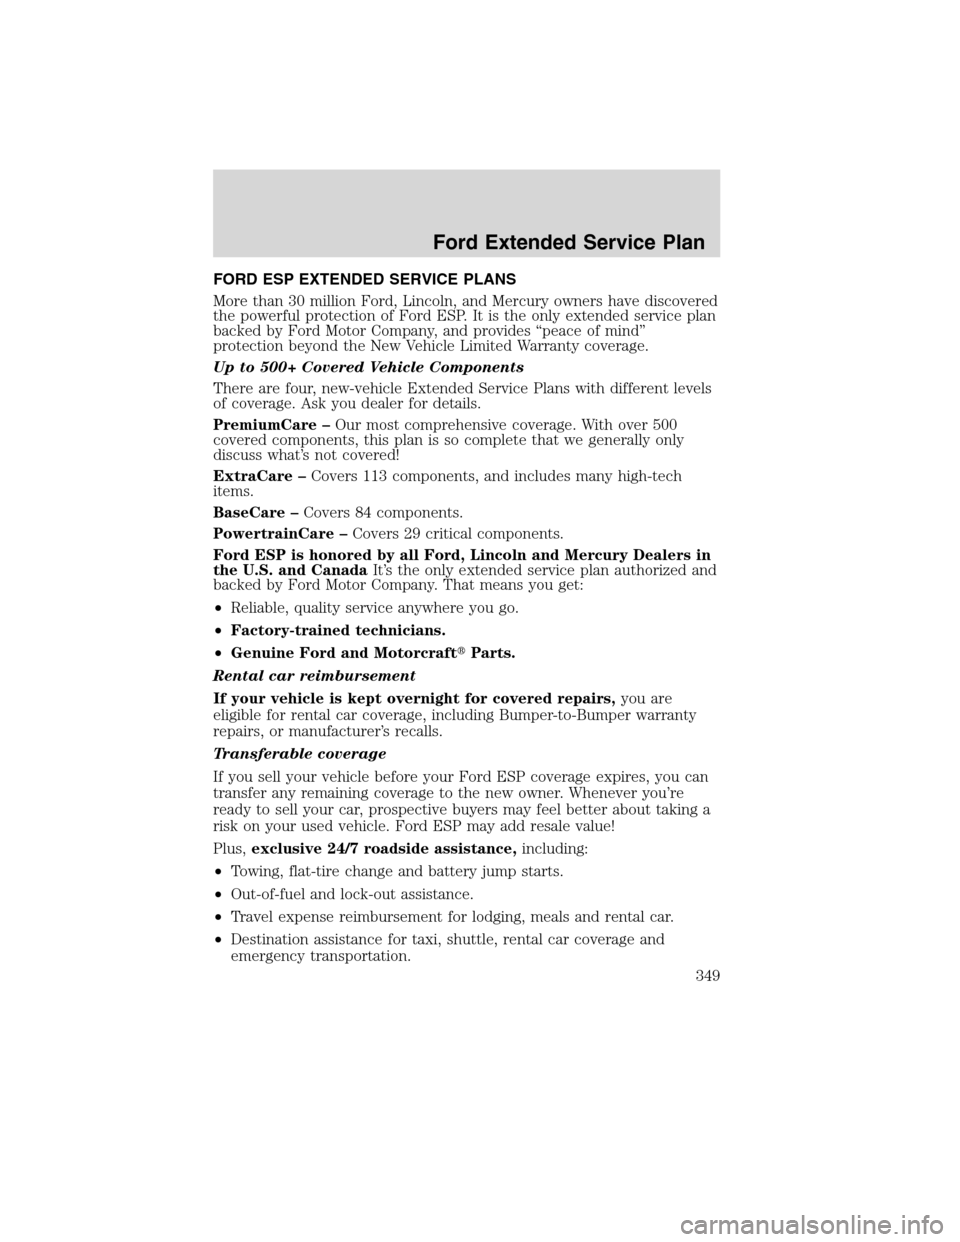 LINCOLN MKS 2010  Owners Manual FORD ESP EXTENDED SERVICE PLANS
More than 30 million Ford, Lincoln, and Mercury owners have discovered
the powerful protection of Ford ESP. It is the only extended service plan
backed by Ford Motor Co